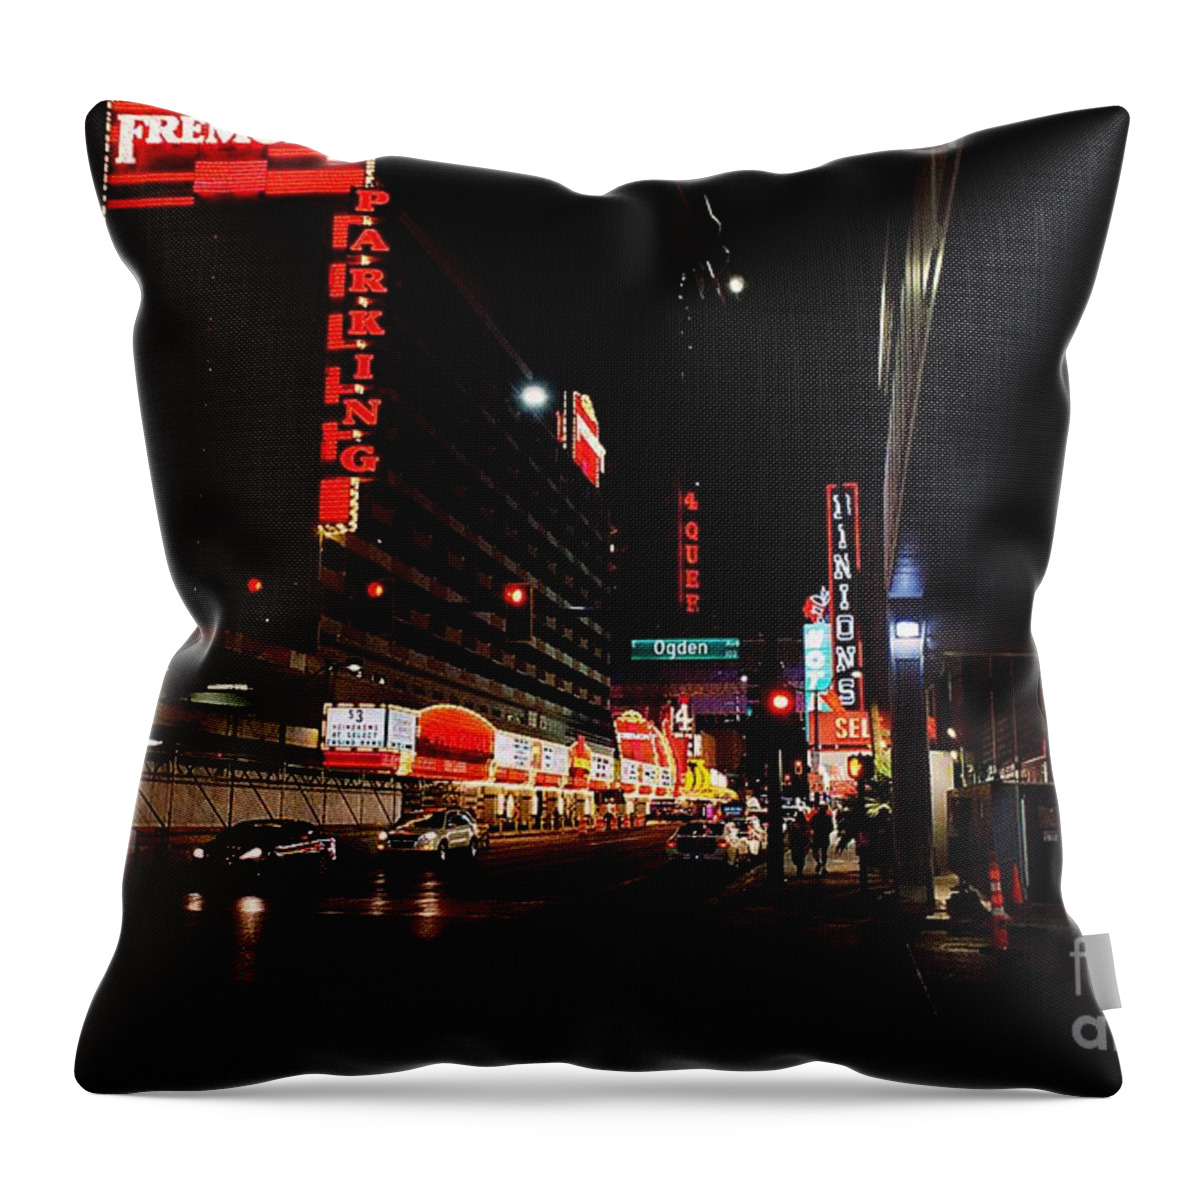  Throw Pillow featuring the photograph Corridor by Rodney Lee Williams